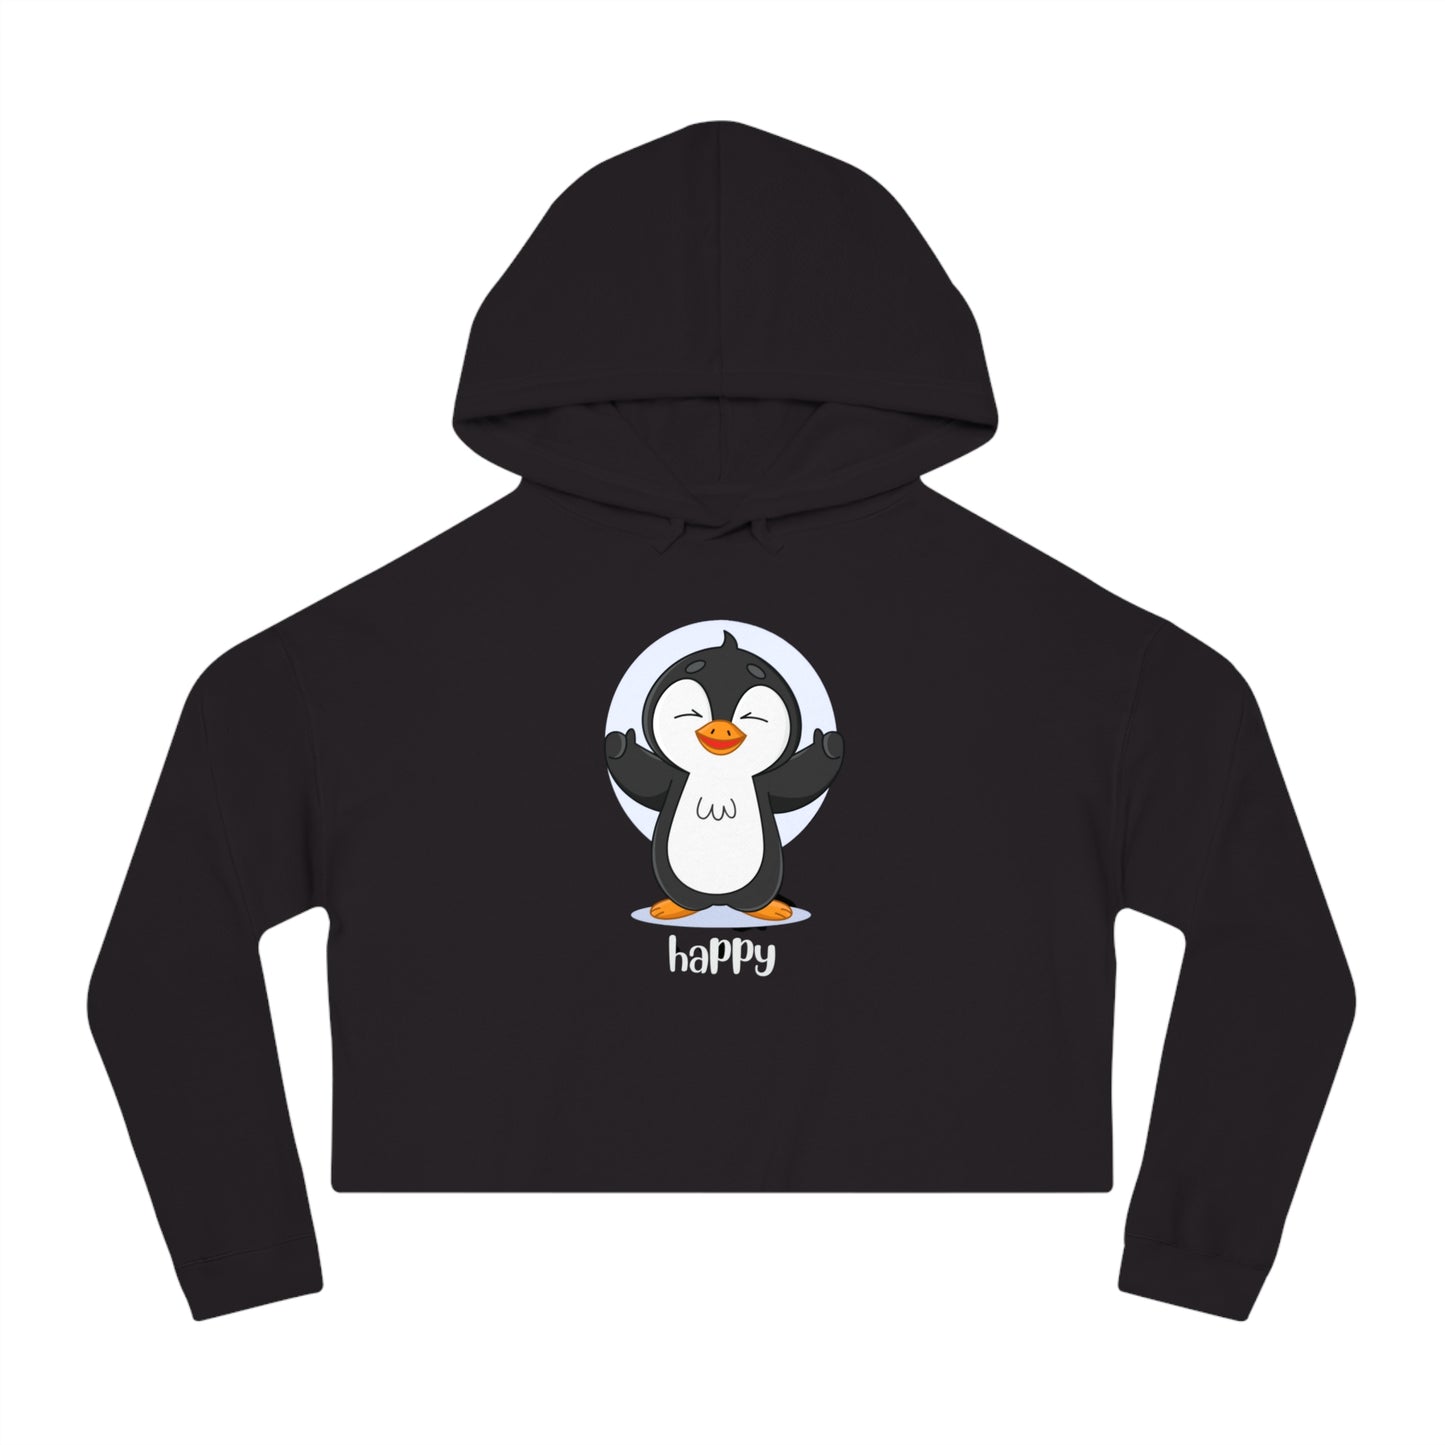 Happy penguin on this simple and stylish Women’s Cropped Hooded Sweatshirt for your enjoyment.